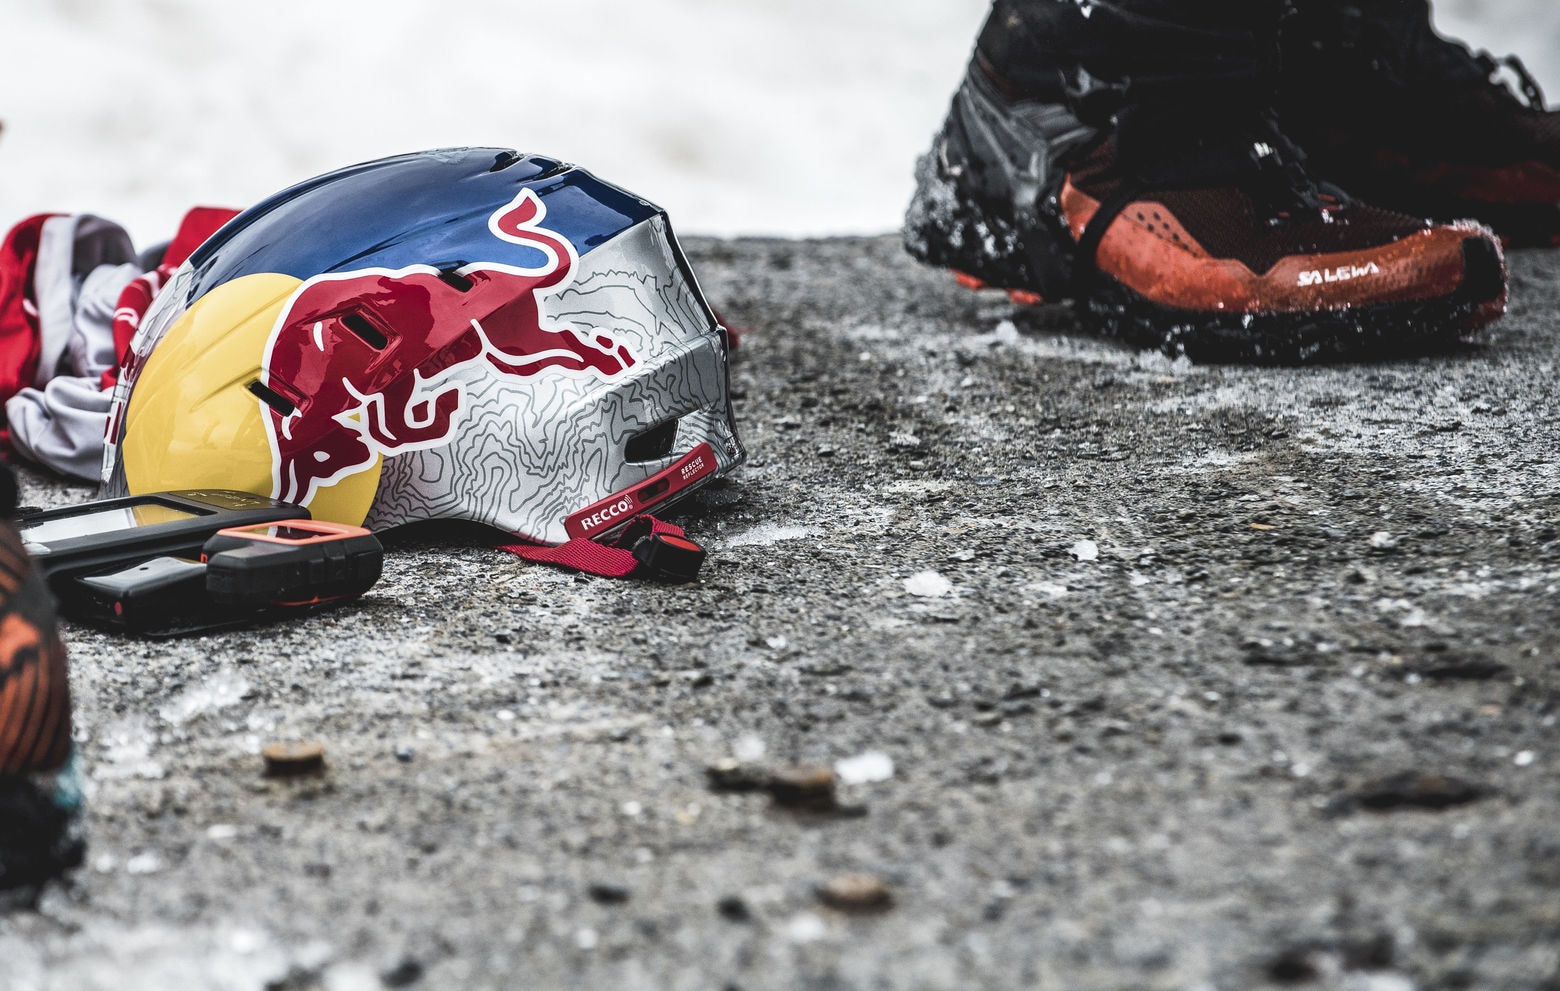 Paul Guschlbauer´s (AUT1) helmet at the Red Bull X-Alps at Titlis Turnpoint, Swizerland on June 21, 2019.